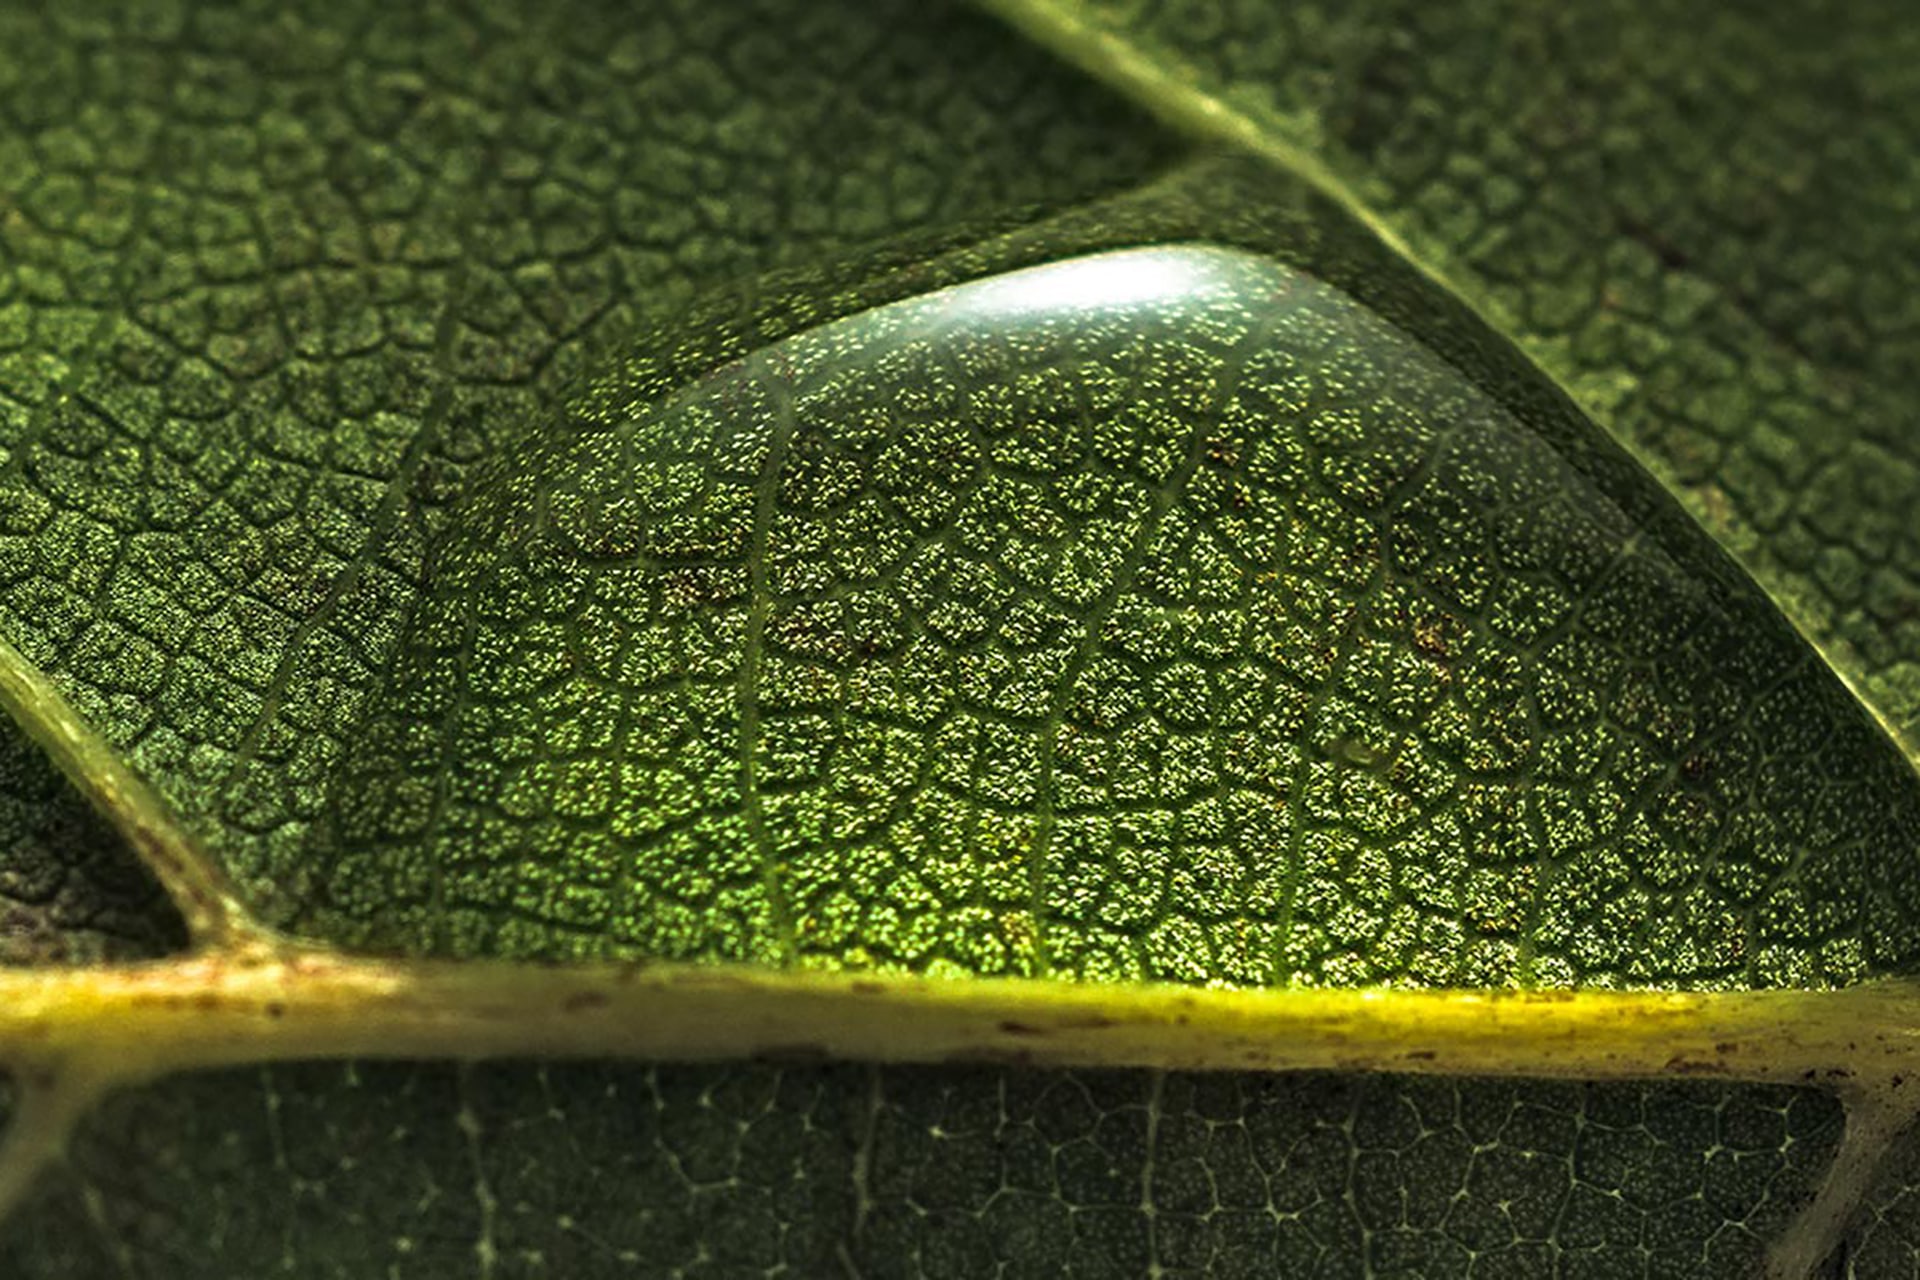 A close-up of a water droplet on a green leaf.